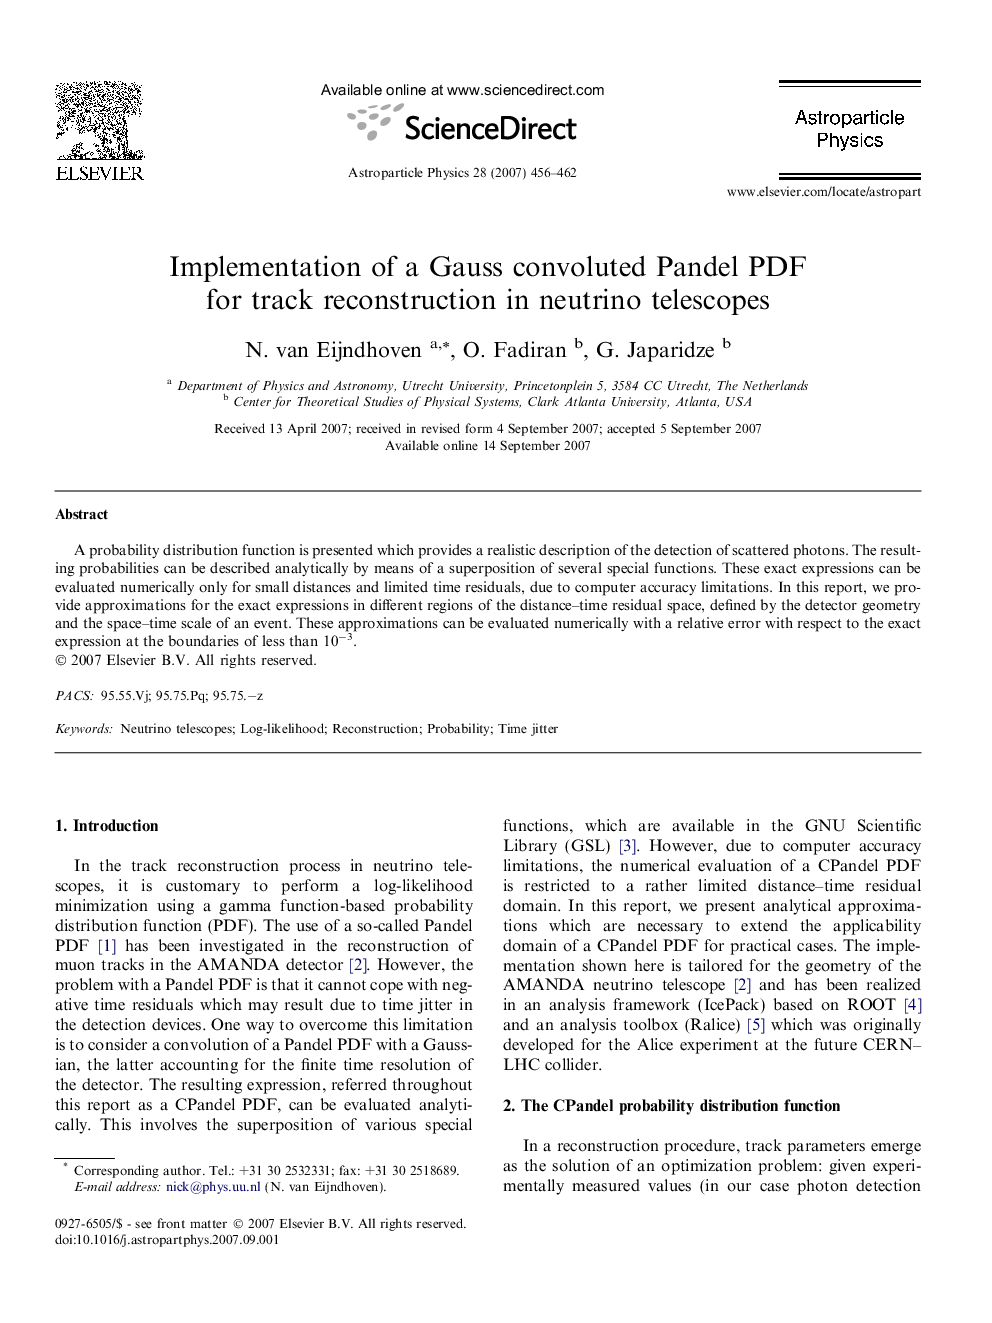 Implementation of a Gauss convoluted Pandel PDF for track reconstruction in neutrino telescopes